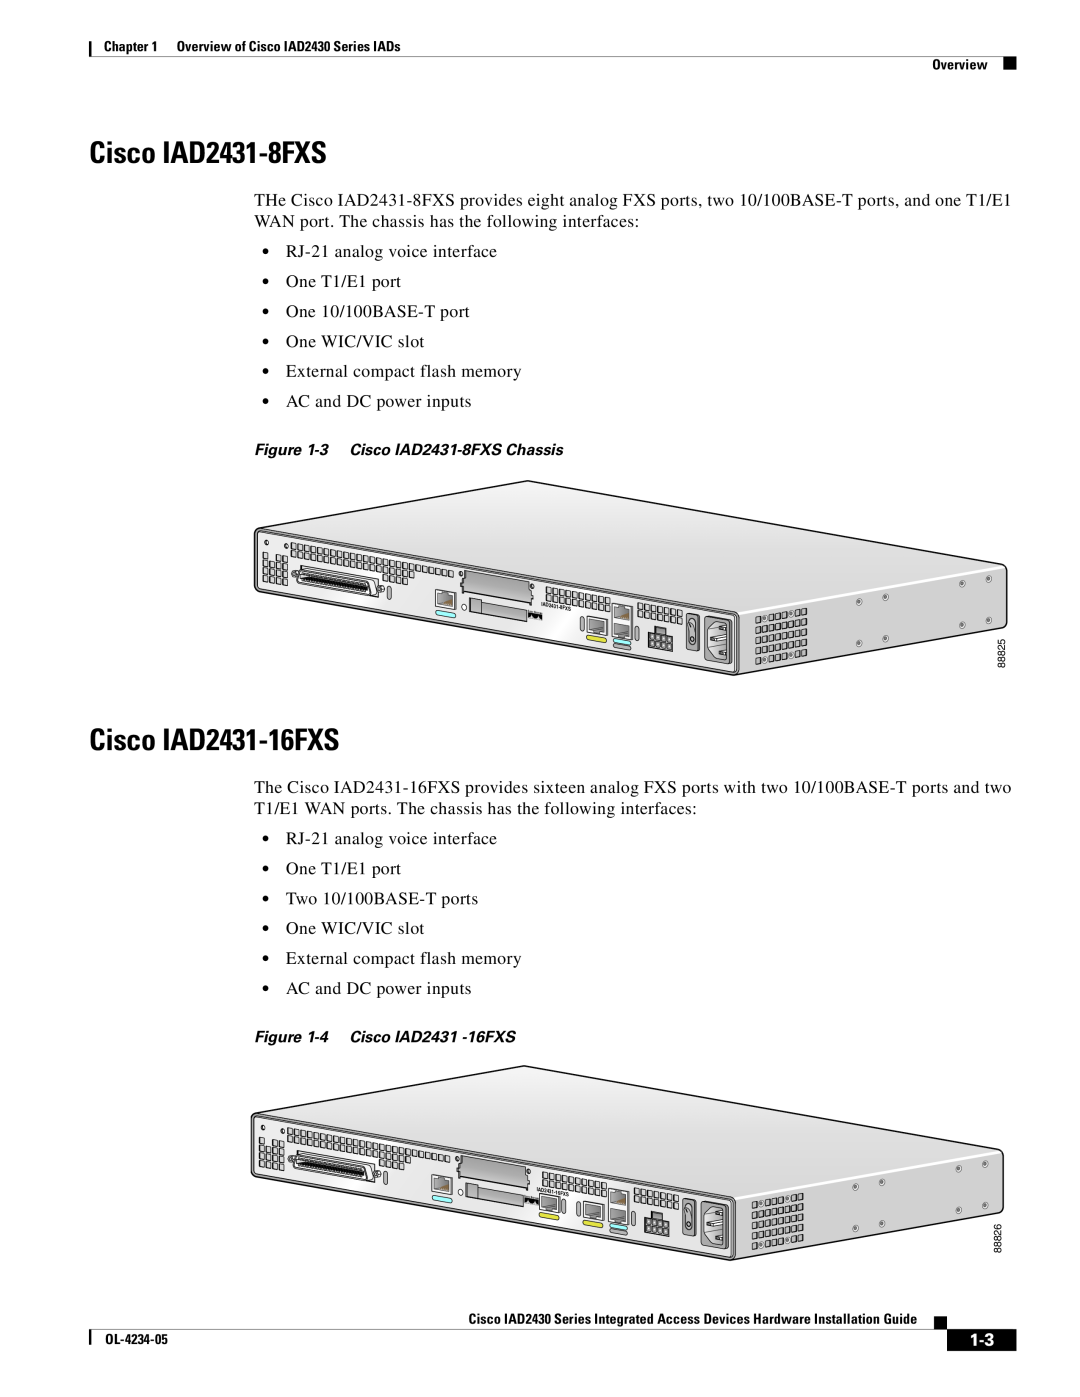 Cisco Systems IAD2430 Series specifications Cisco IAD2431-16FXS, 3 Cisco IAD2431-8FXS Chassis, 4 Cisco IAD2431 -16FXS 